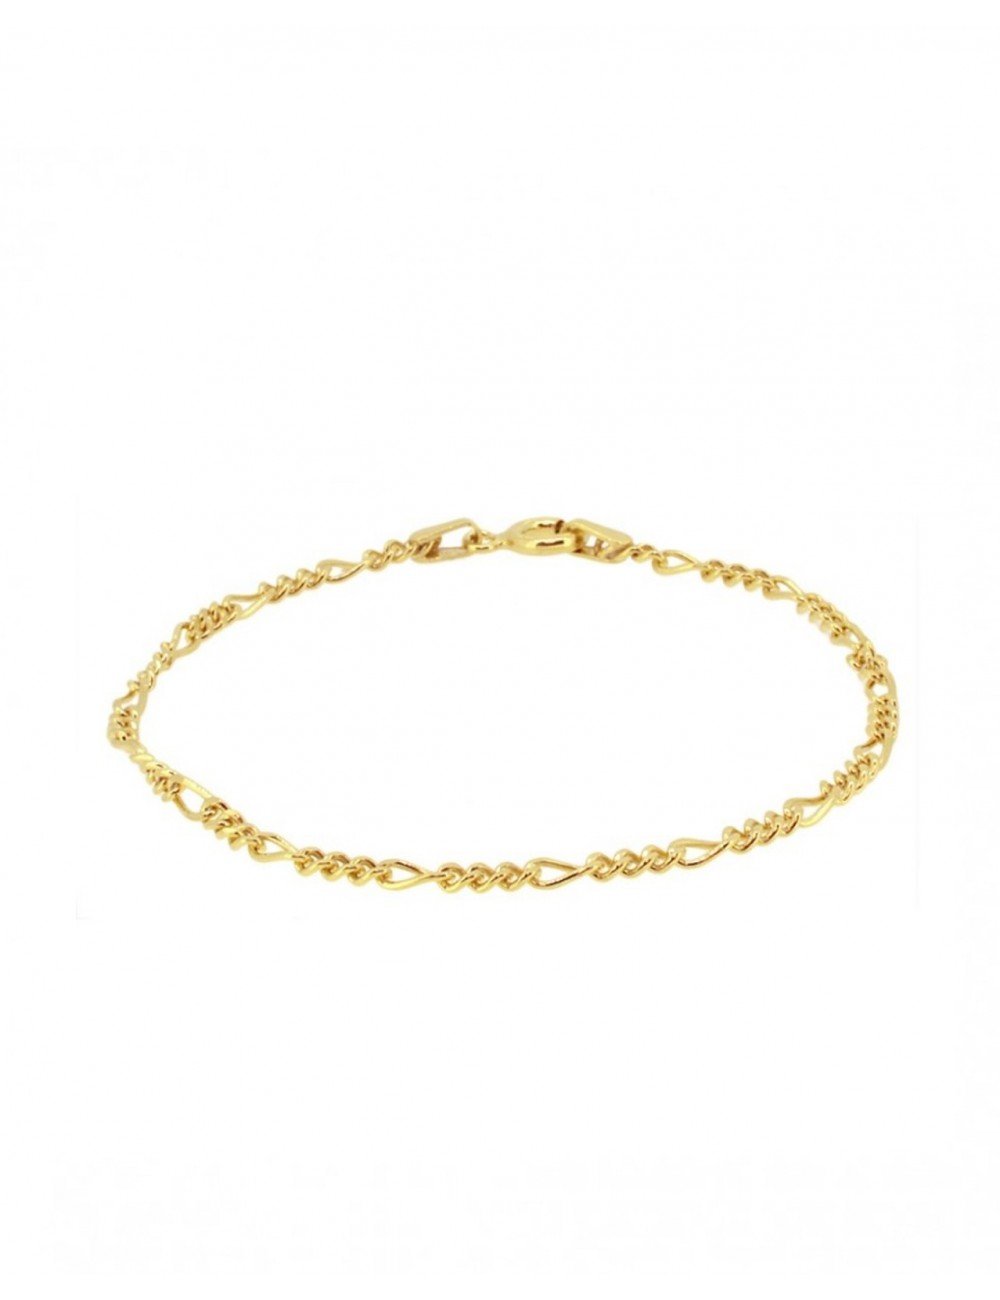 Pre-Owned 9ct Gold Figaro Bracelet – Claytons Jewellers